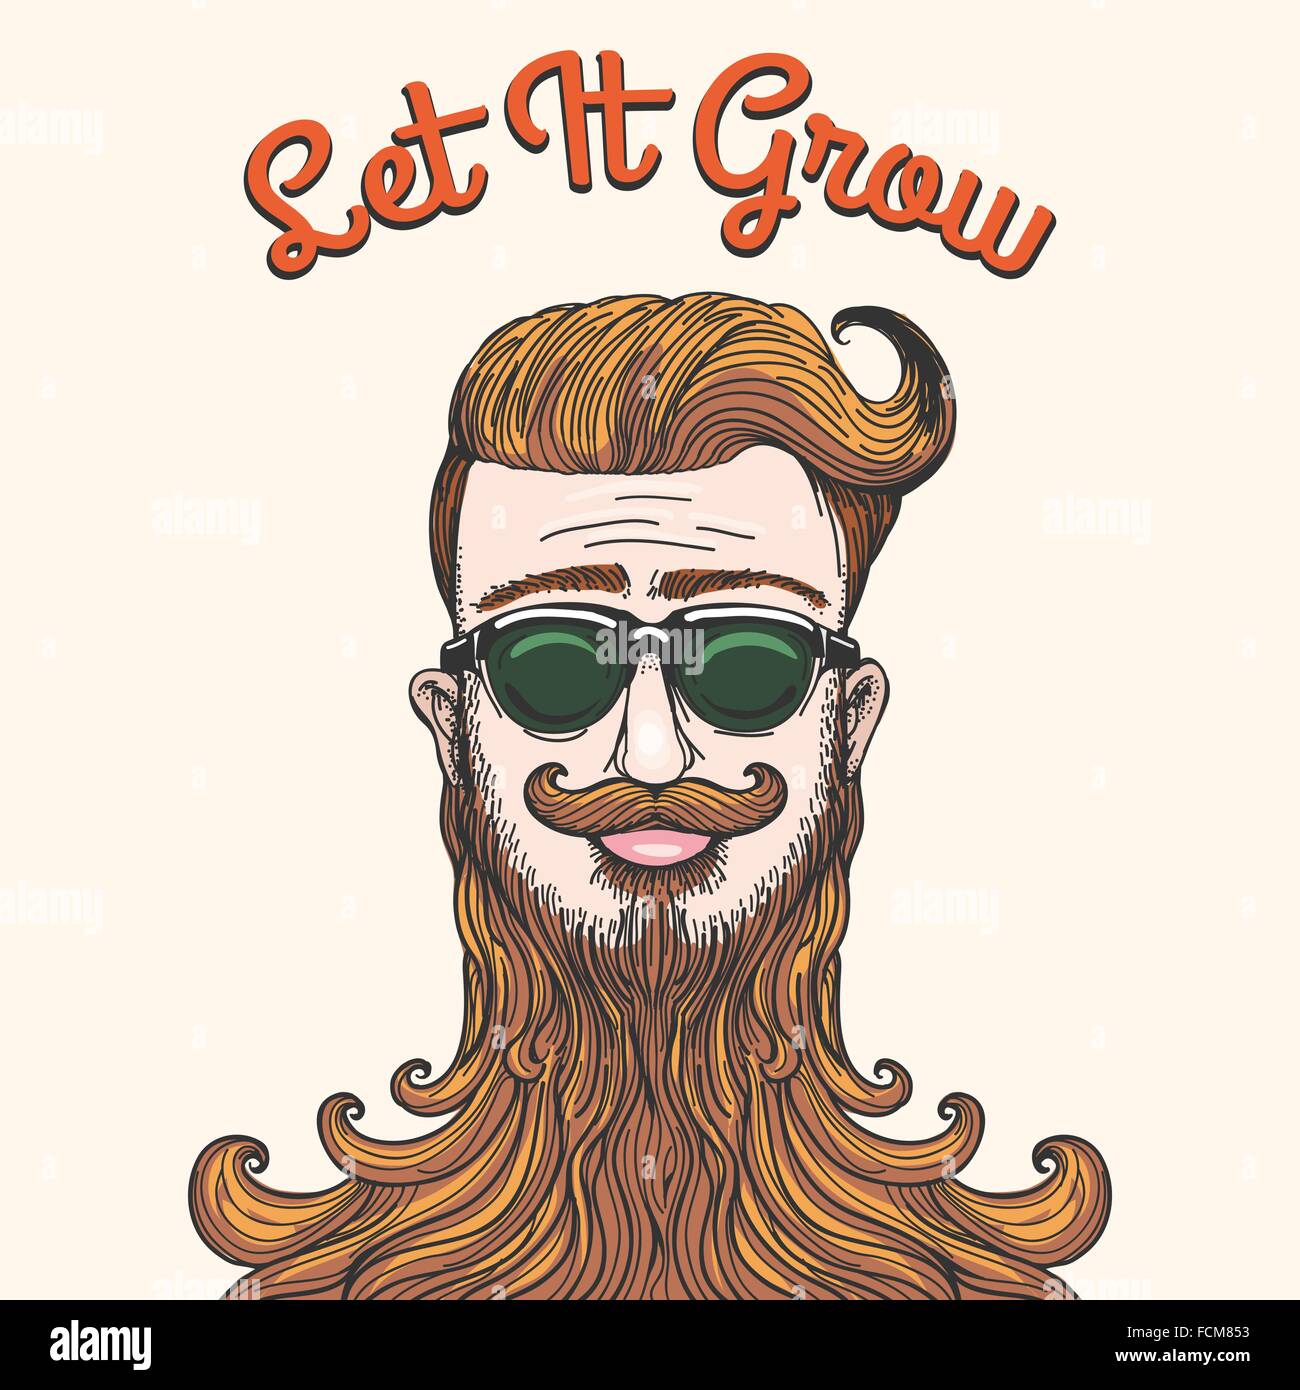 Hipster with huge beard and wording Let It Grow. Humorous Sketch style illustration. Free font used. Stock Vector